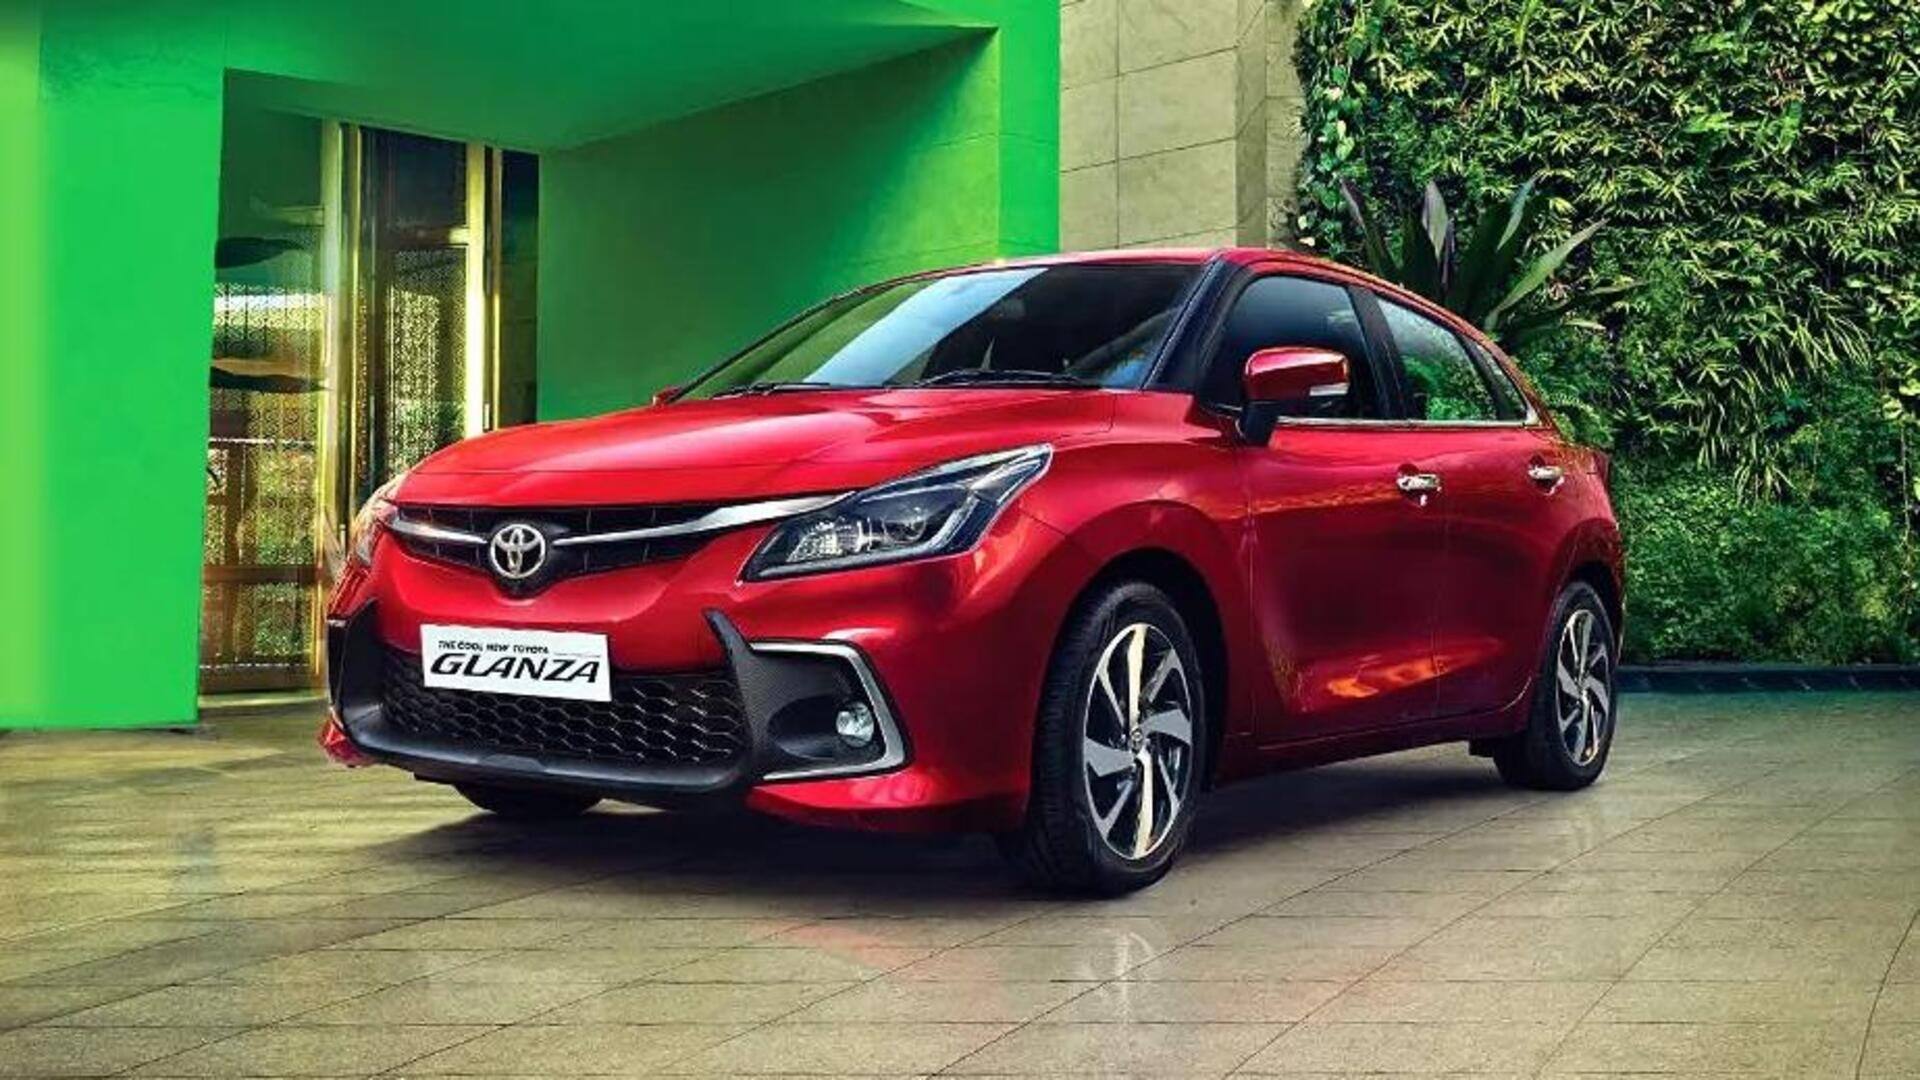 Be prepared to wait a little longer for Toyota Glanza